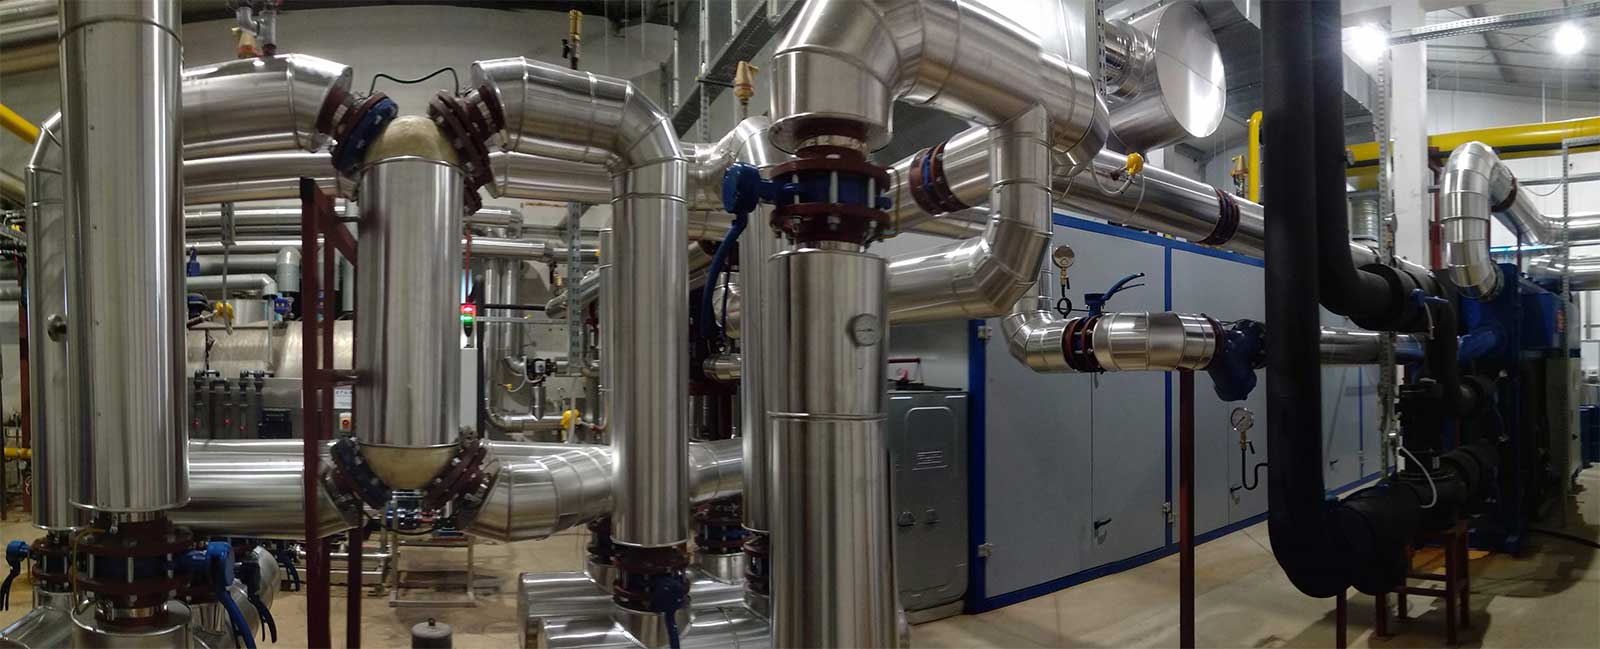 The CHP plant operates in polygeneration mode, supplying the facilities of Hajduk Group Sp. z o.o. with power, heat, cold, and steam. © Centrum Elektroniki Stosowanej CES Sp. z o.o.